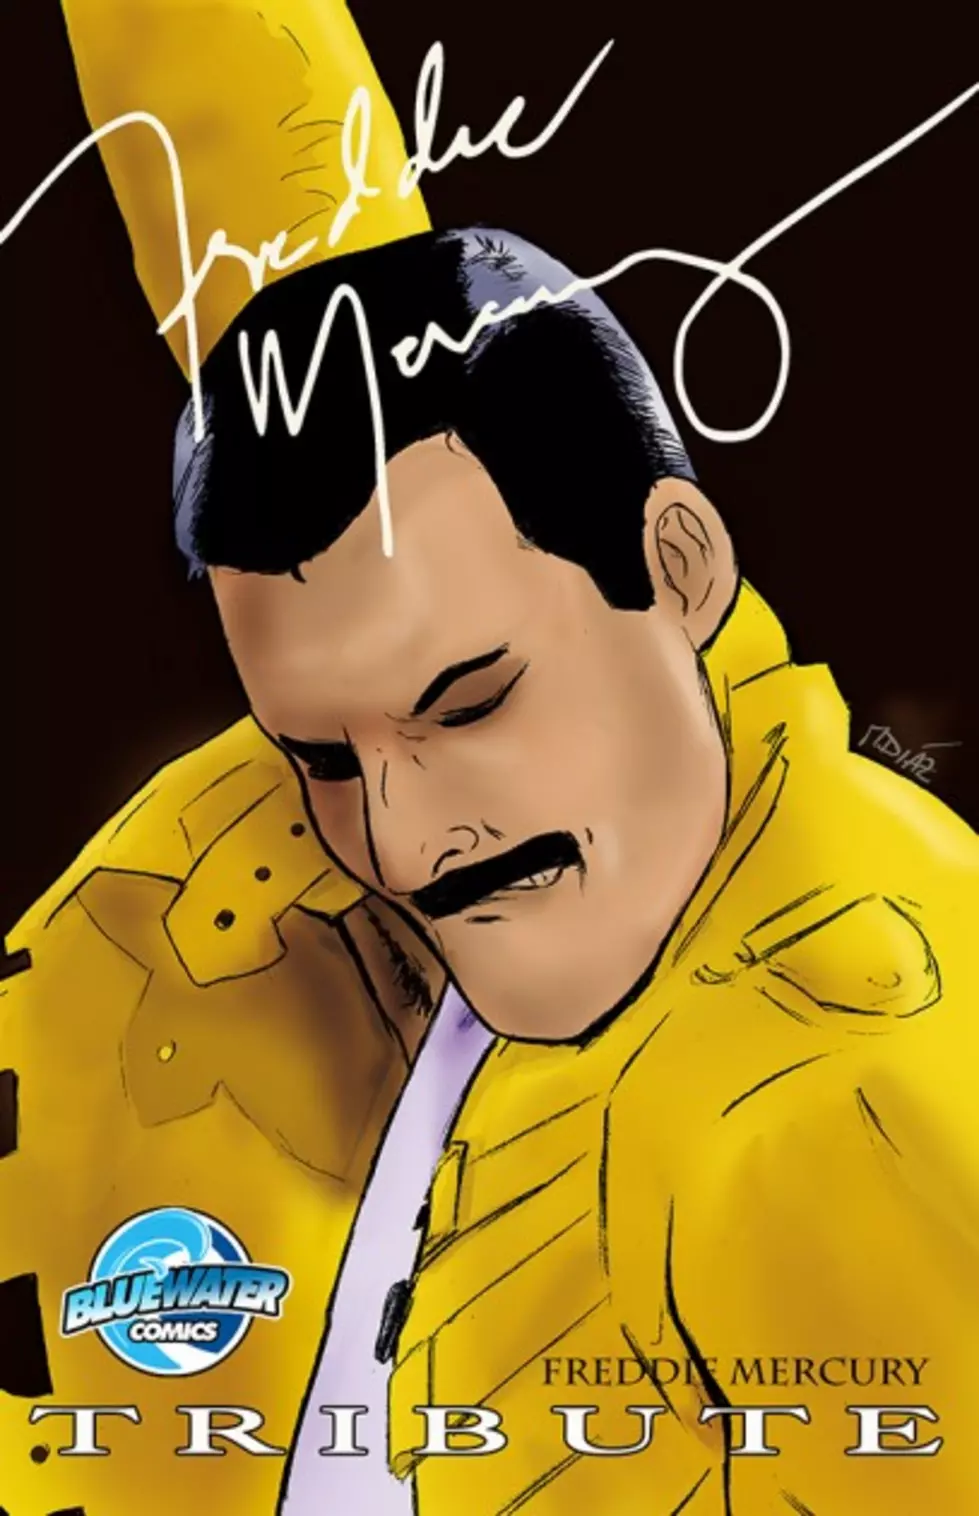 Freddie Mercury Comic Book Now Available